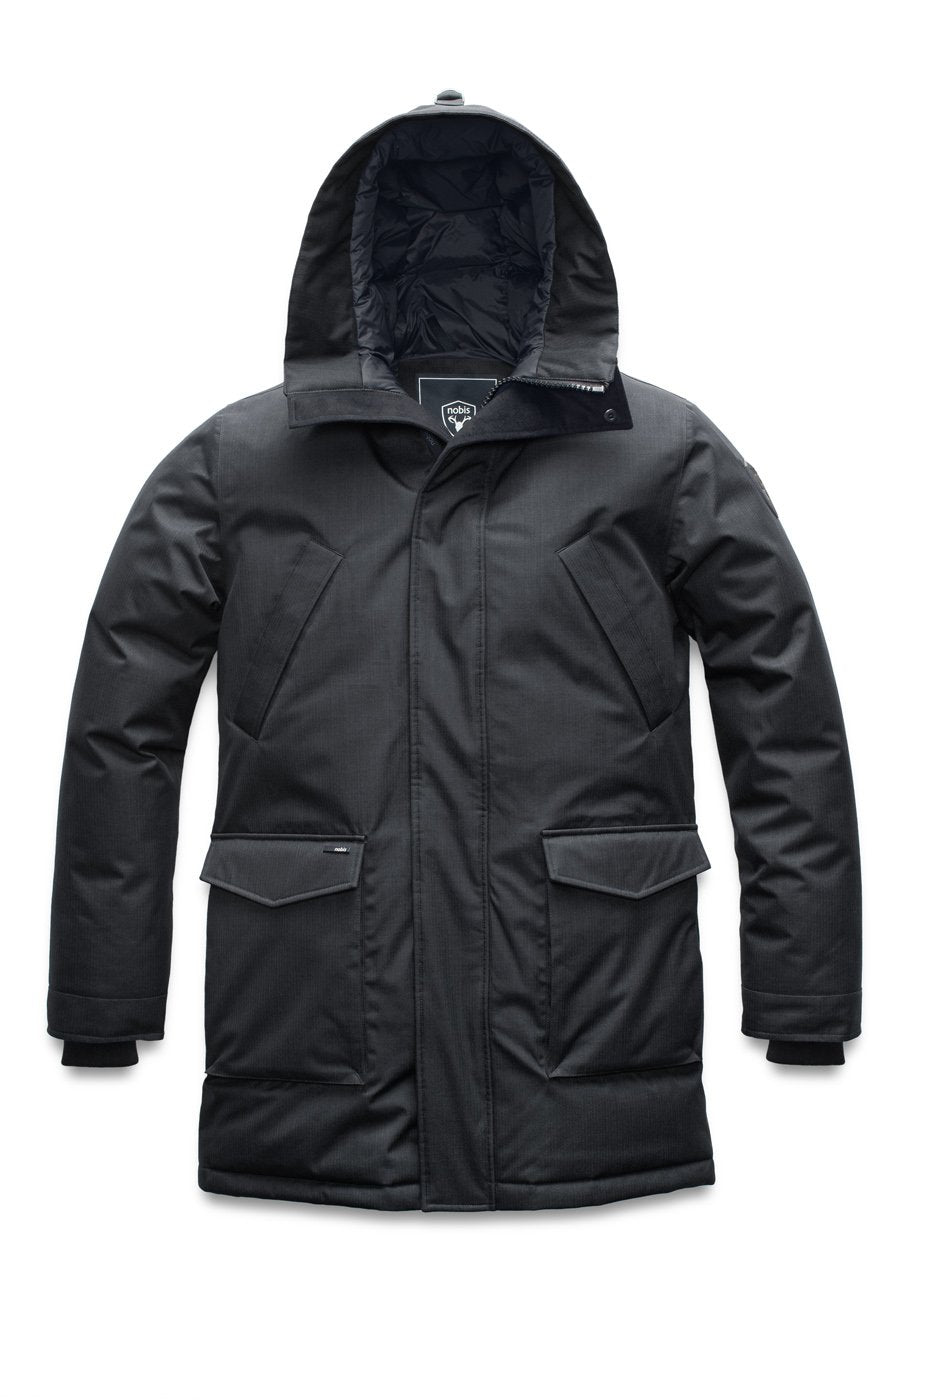 Men's thigh length down-filled parka with non-removable hood in Black